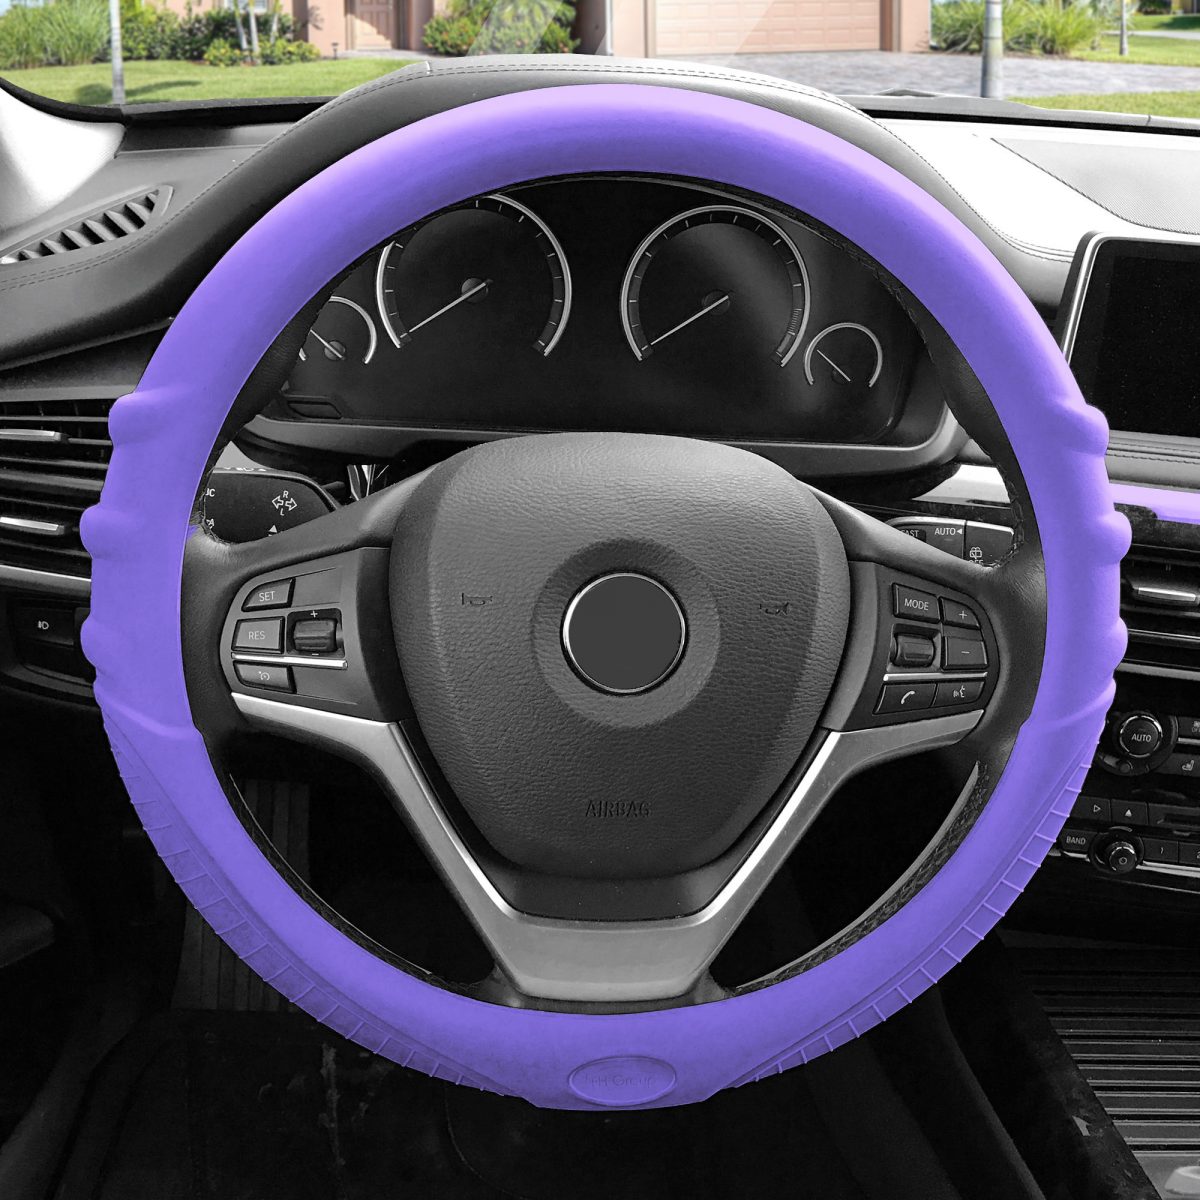 FH Group 14.5 - 15.5" Purple Silicone Steering Wheel Cover with Grip Marks and Air Freshener - image 2 of 4